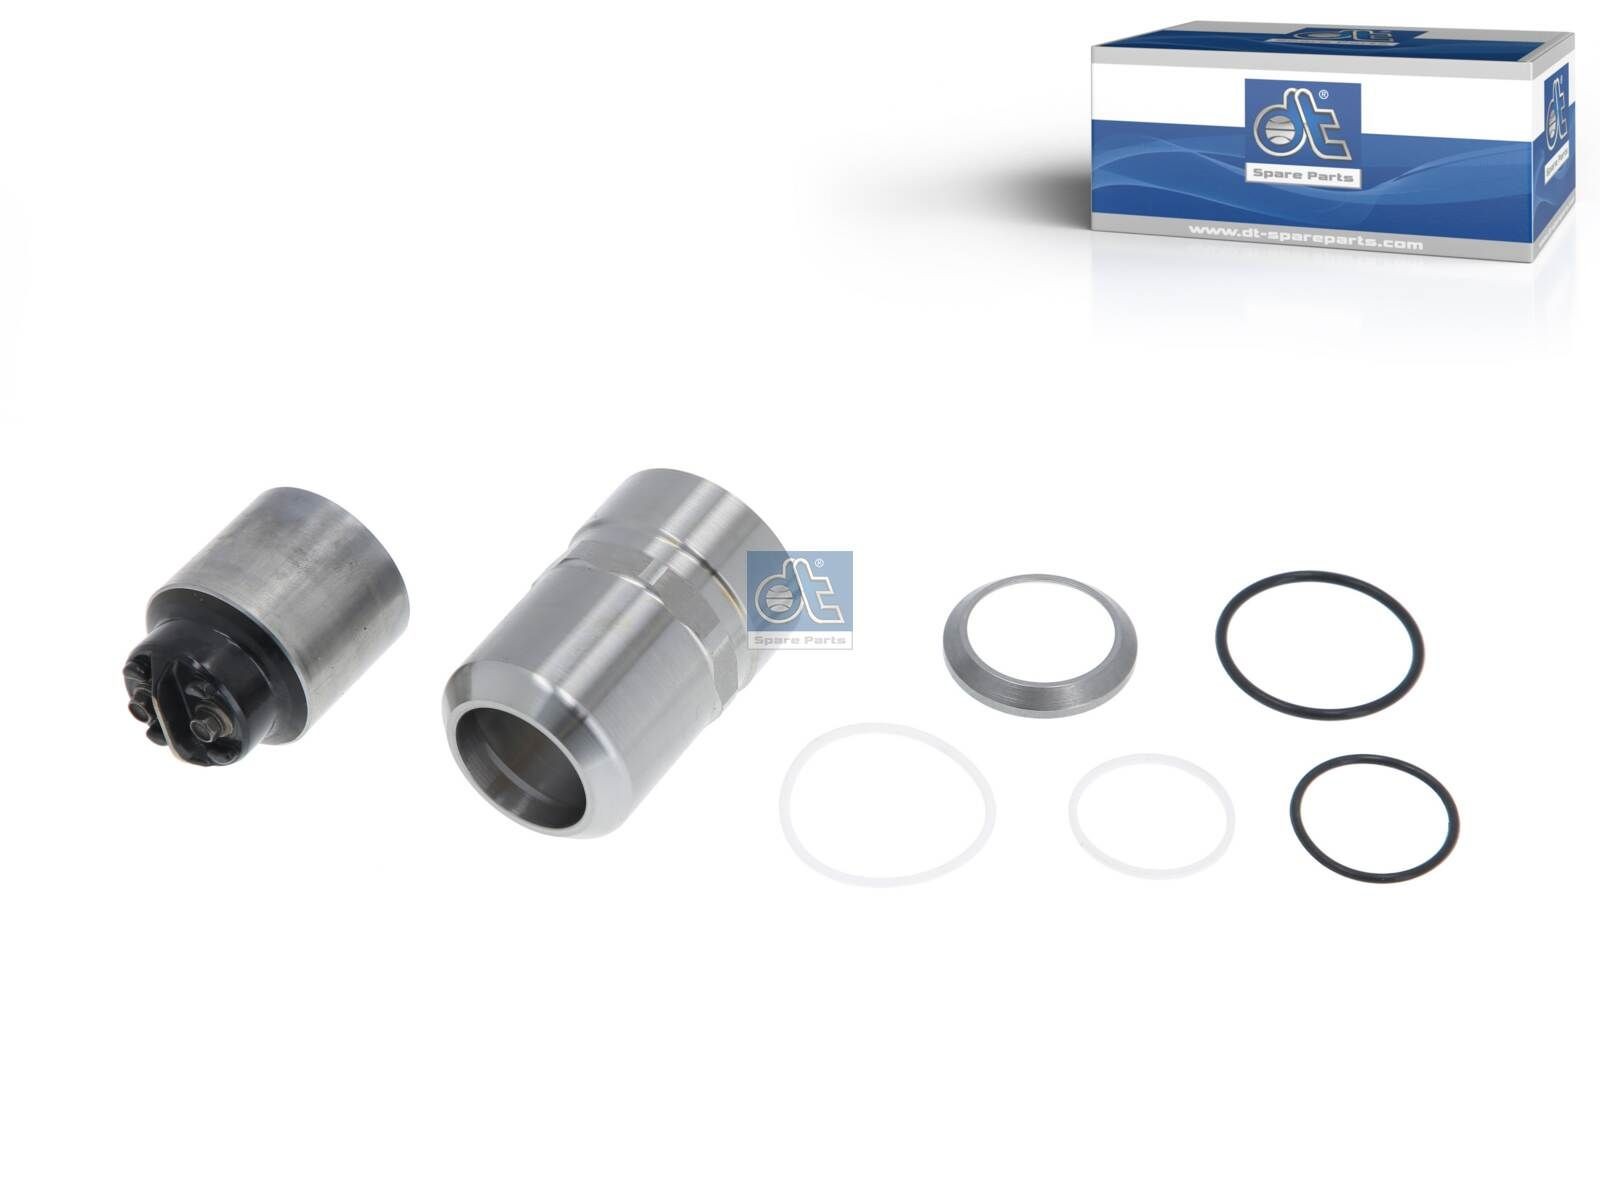 Original 1.31280 DT Spare Parts Repair kit, injection nozzle experience and price